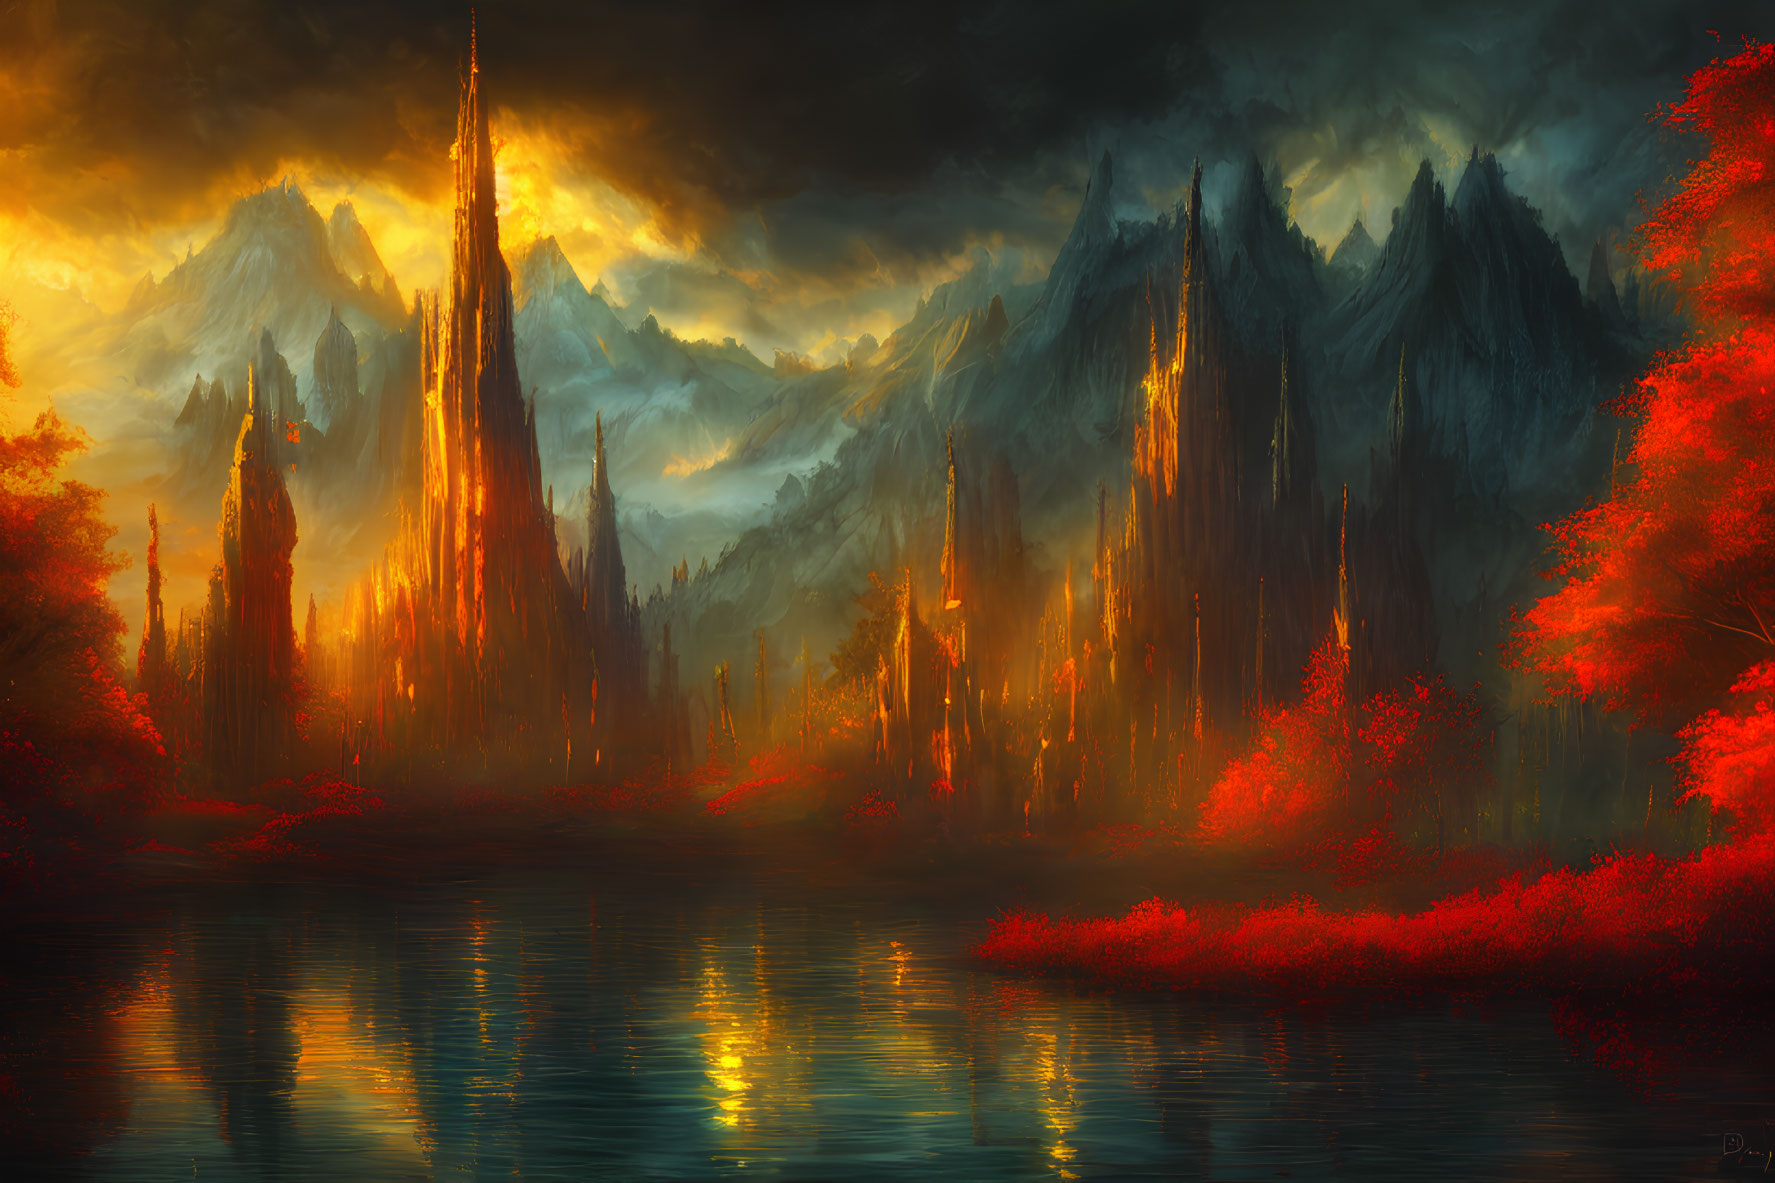 Fantastical landscape with fiery-red foliage and towering spires